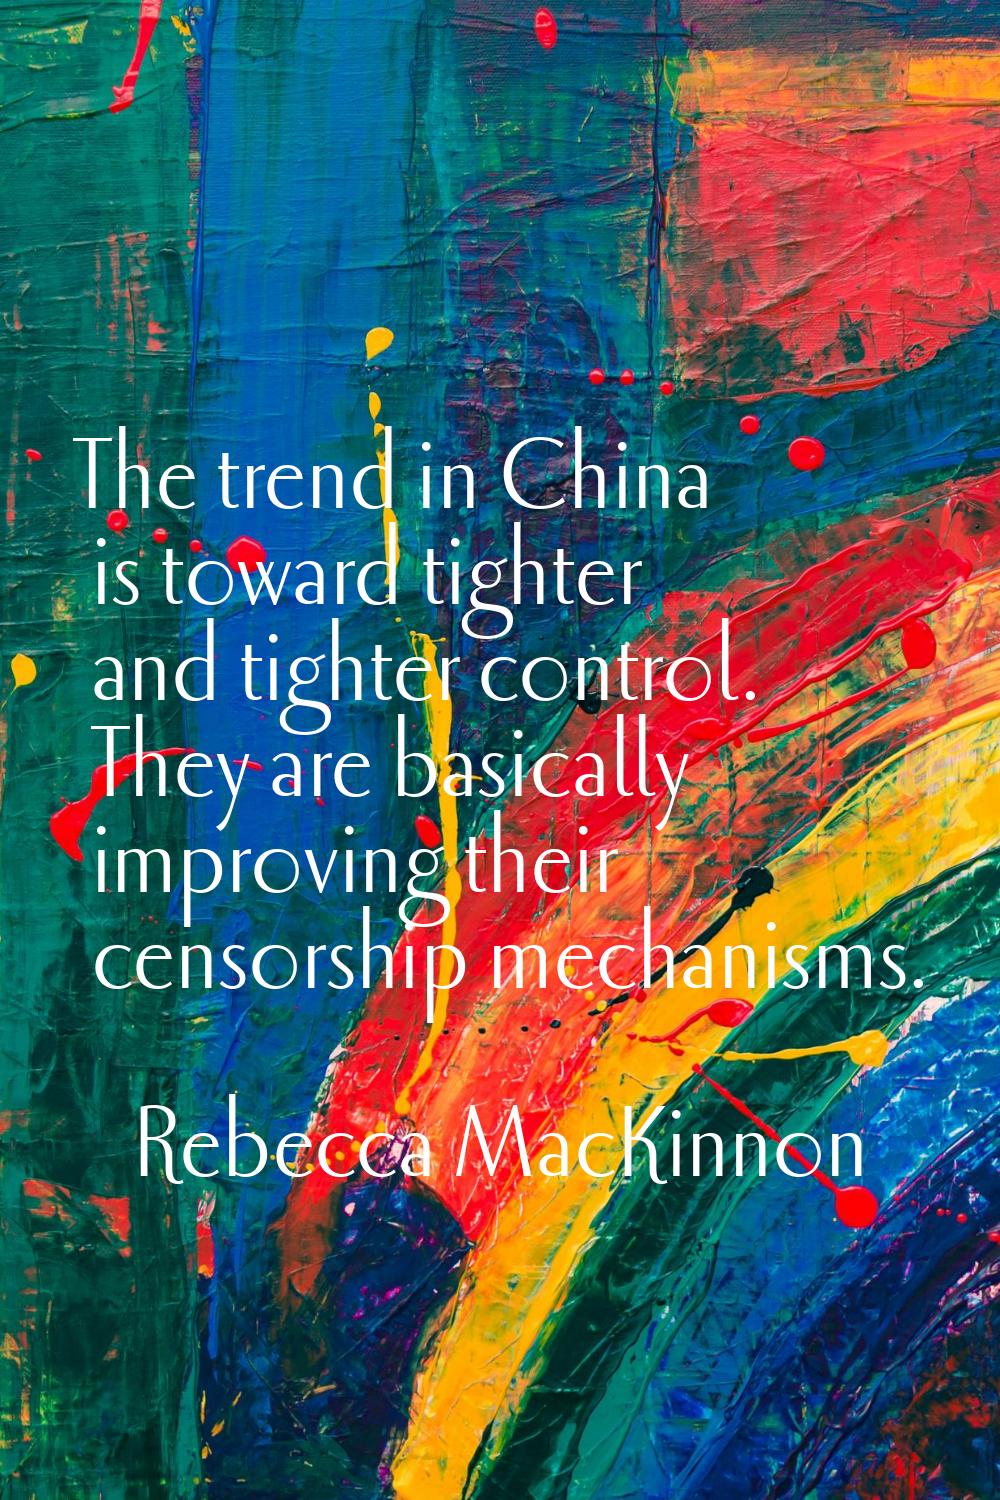 The trend in China is toward tighter and tighter control. They are basically improving their censor